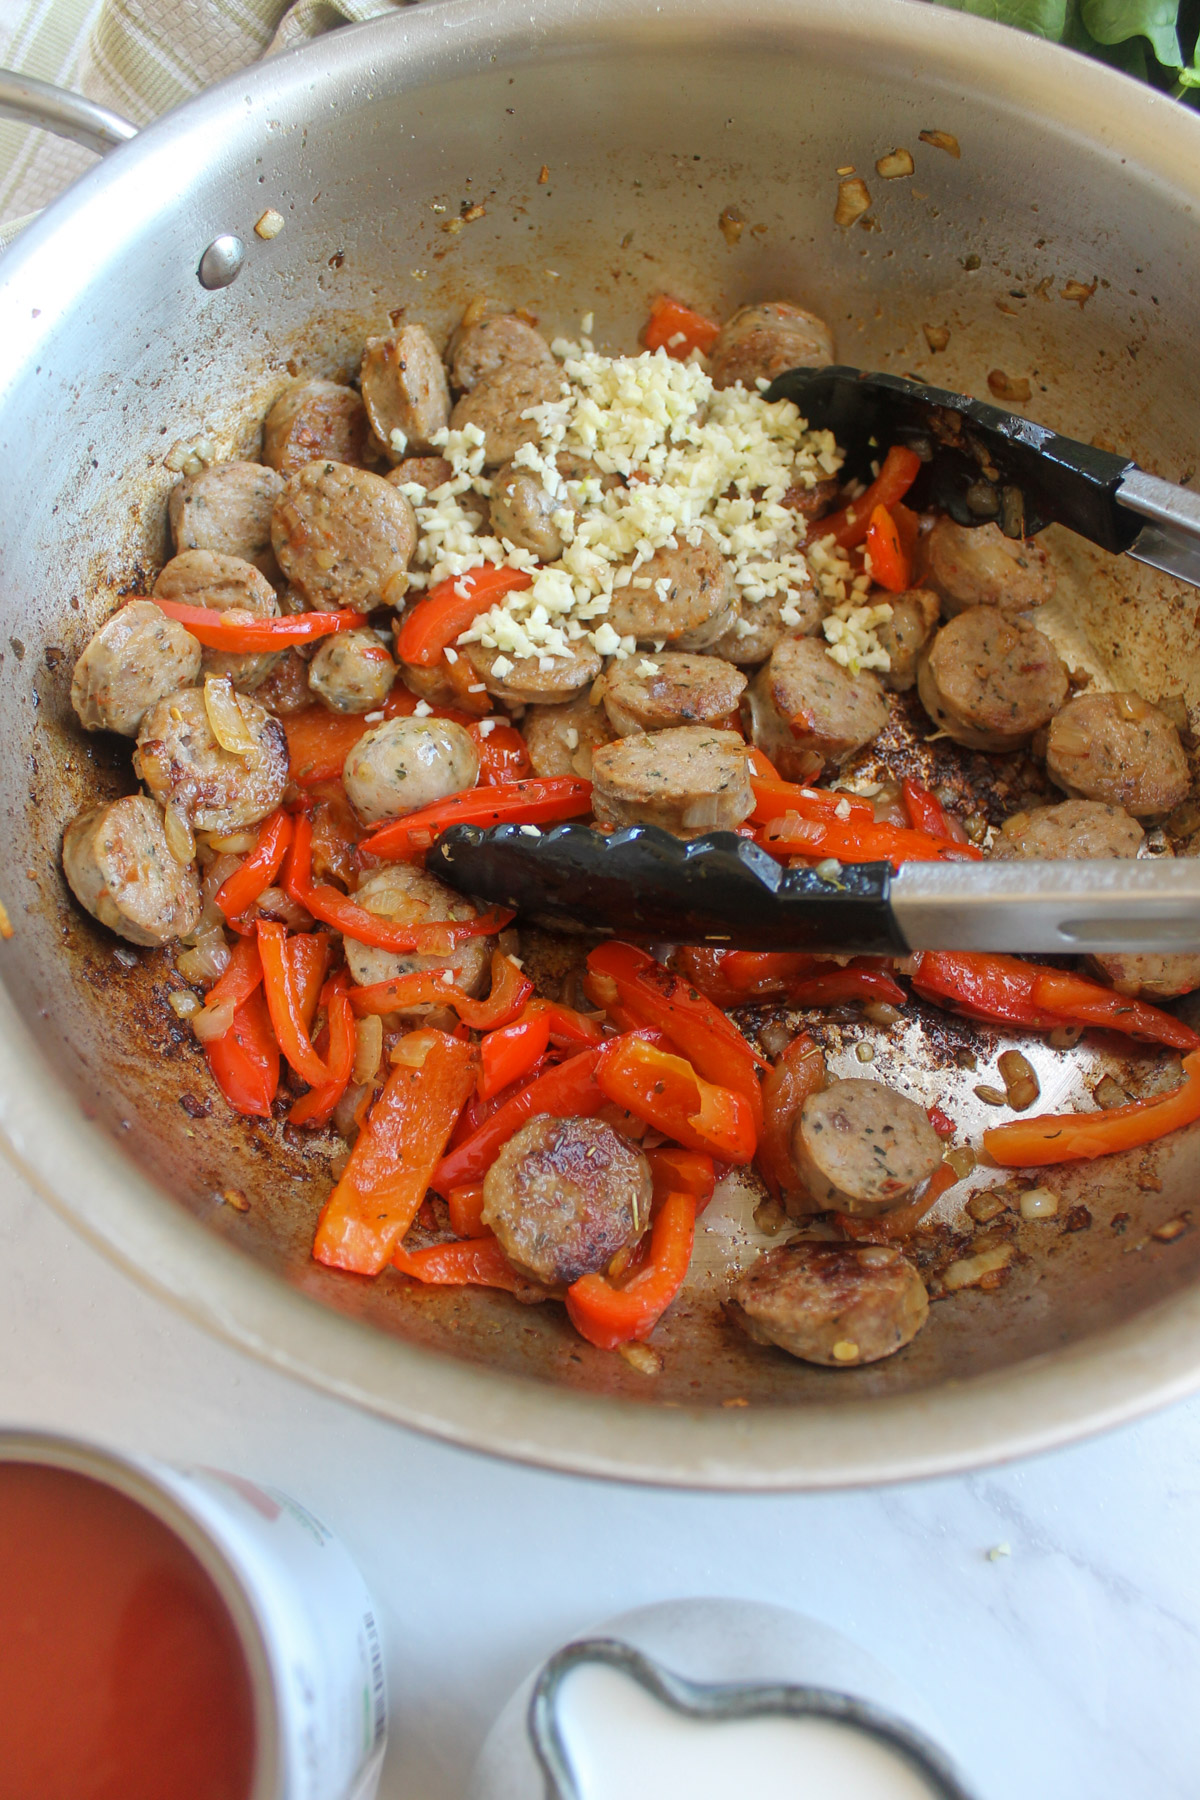 The sliced sausage links added back to the skillet with the onions, red bell pepper and garlic.